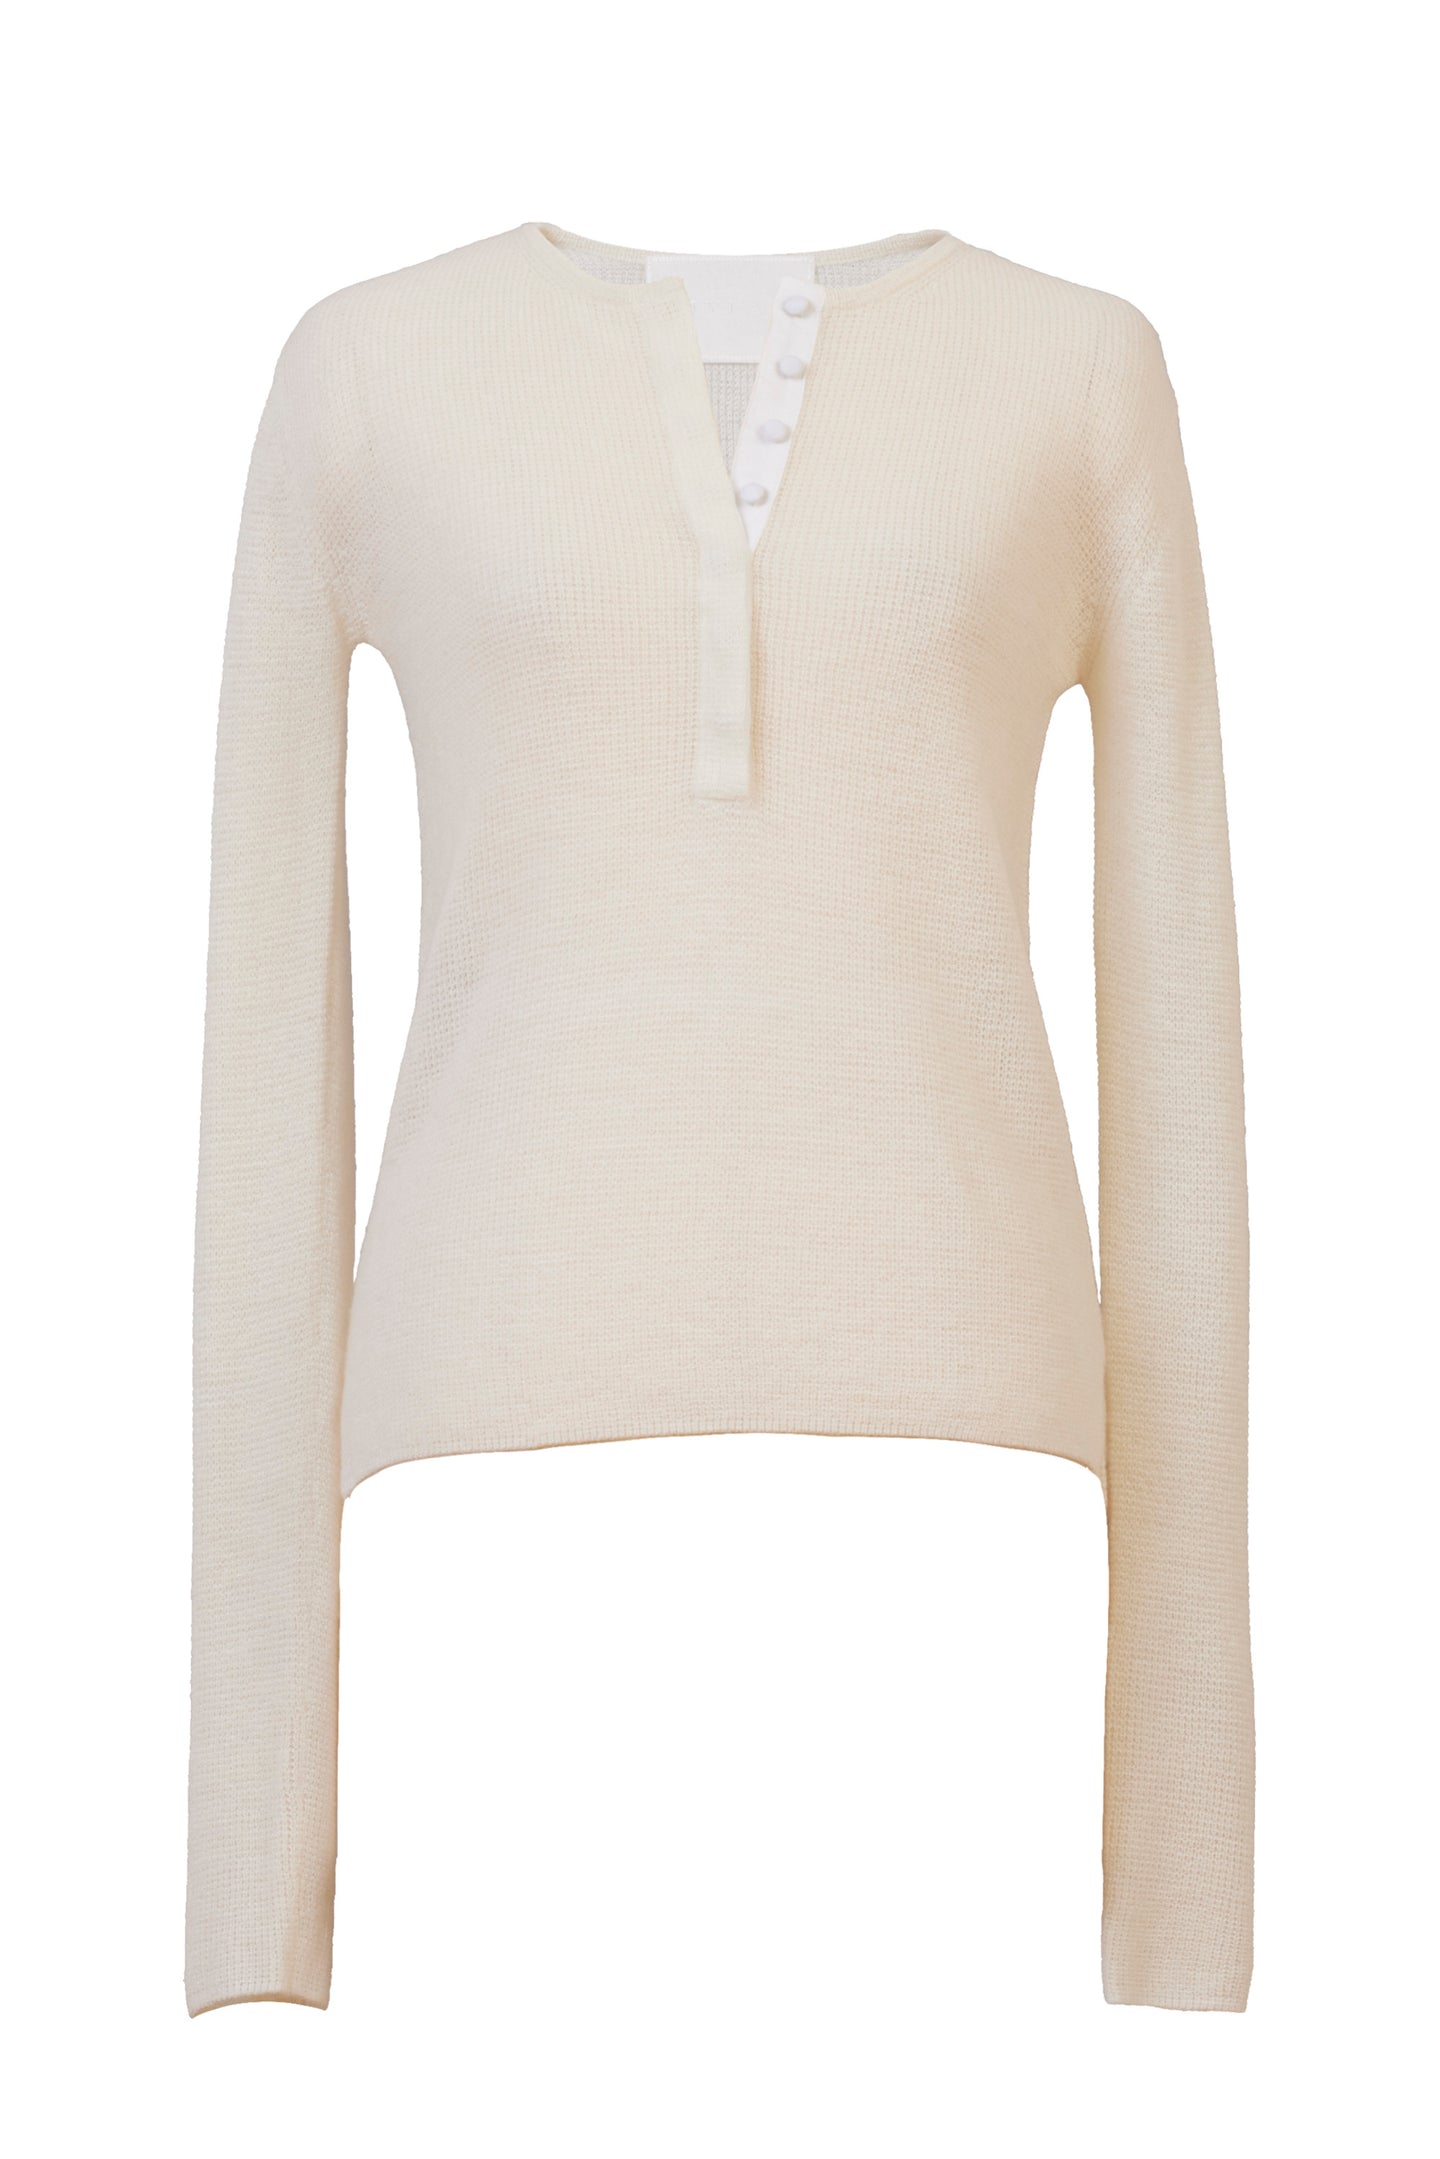 Cashmere Henly Neck Top | Pearl